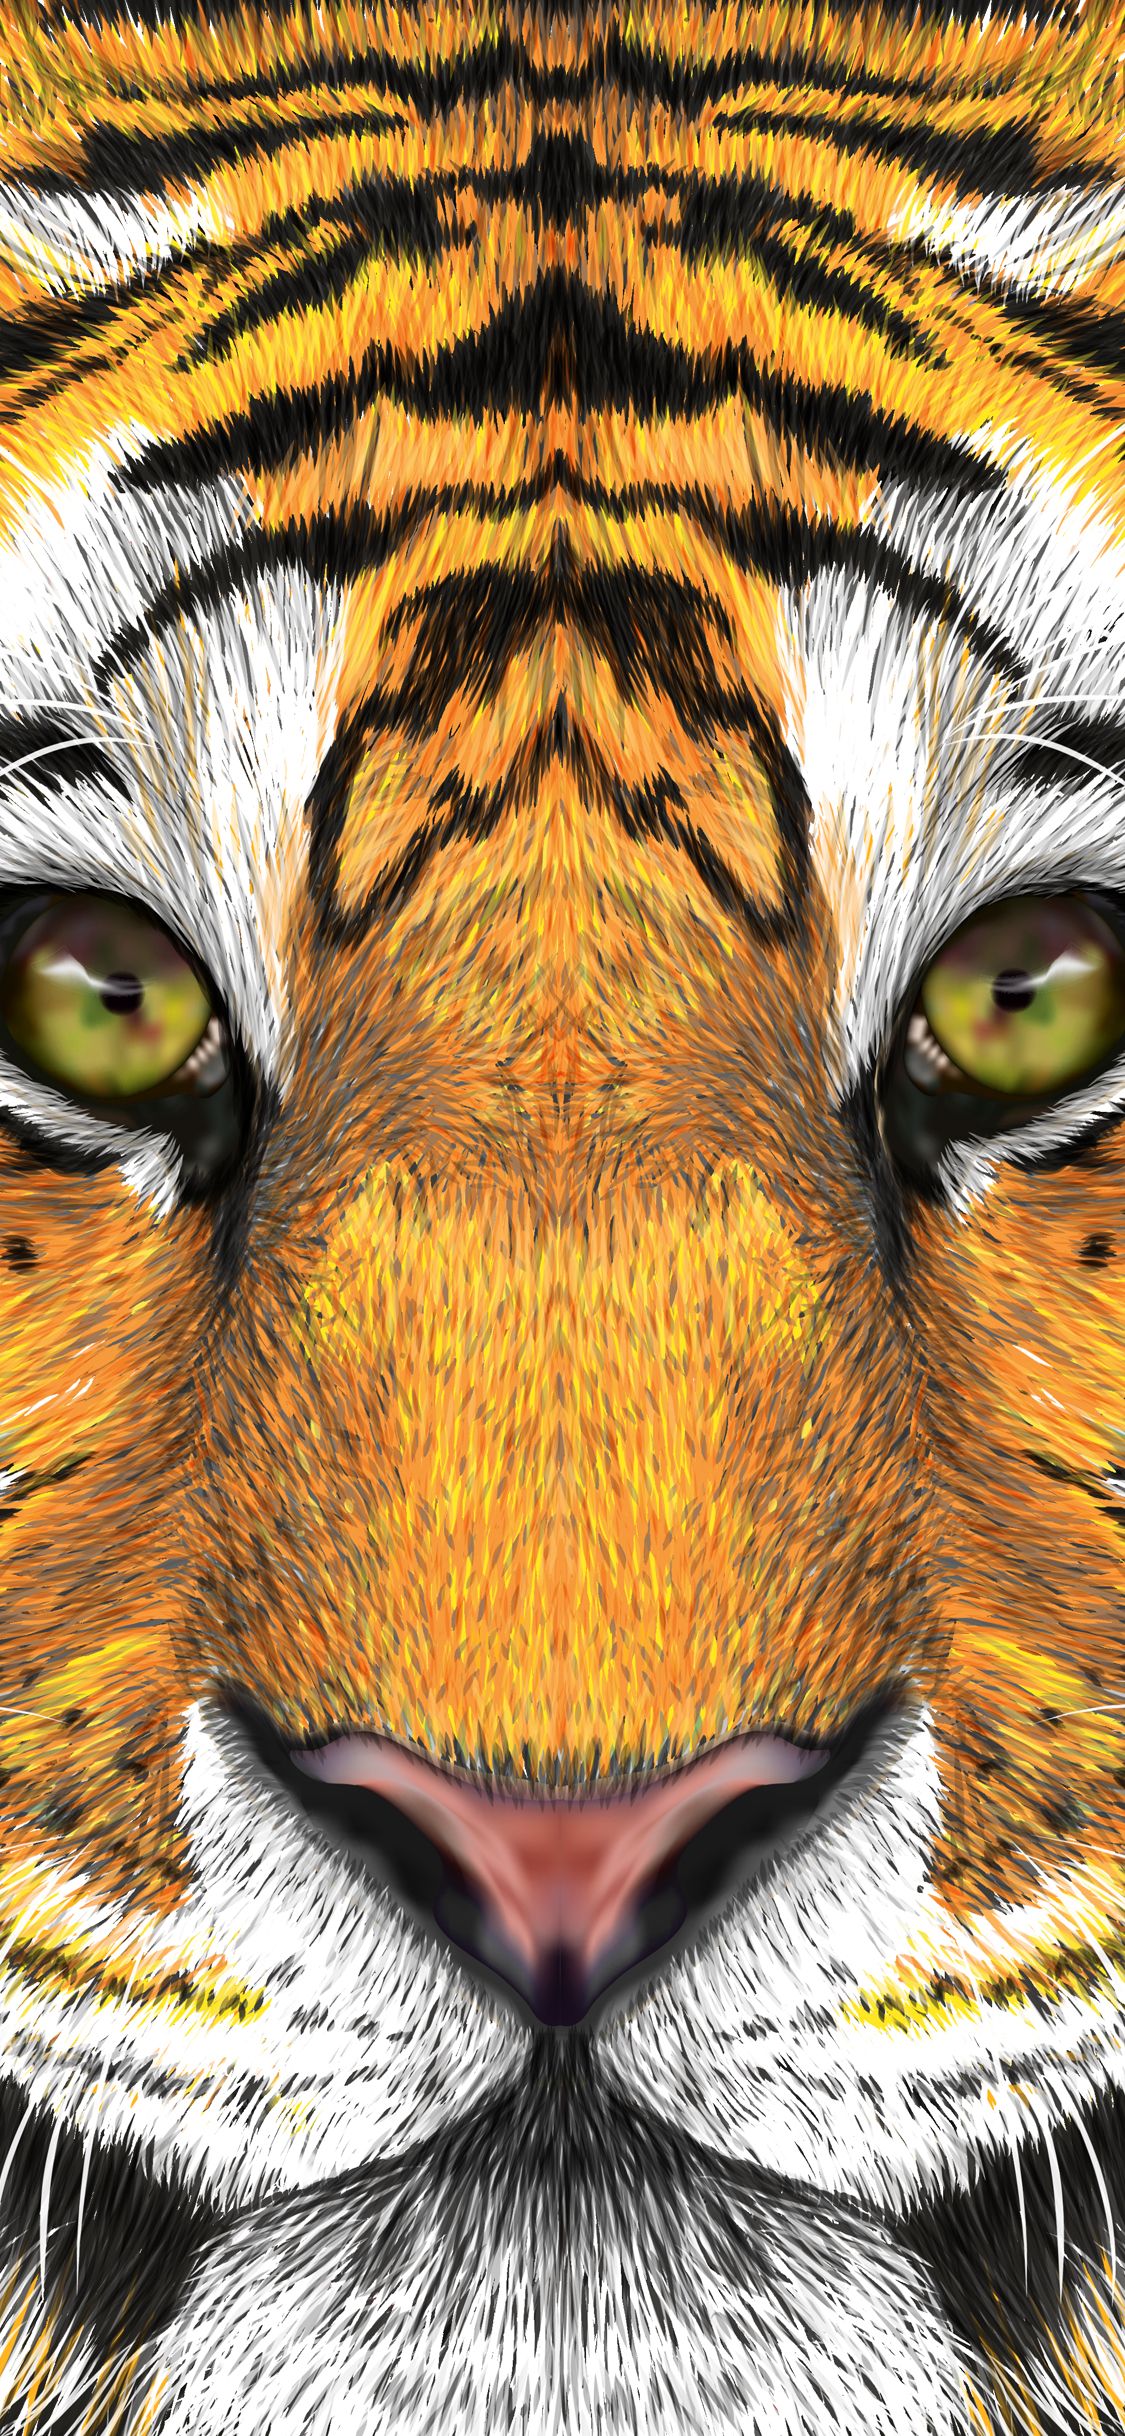 tiger face wallpaper for iphone